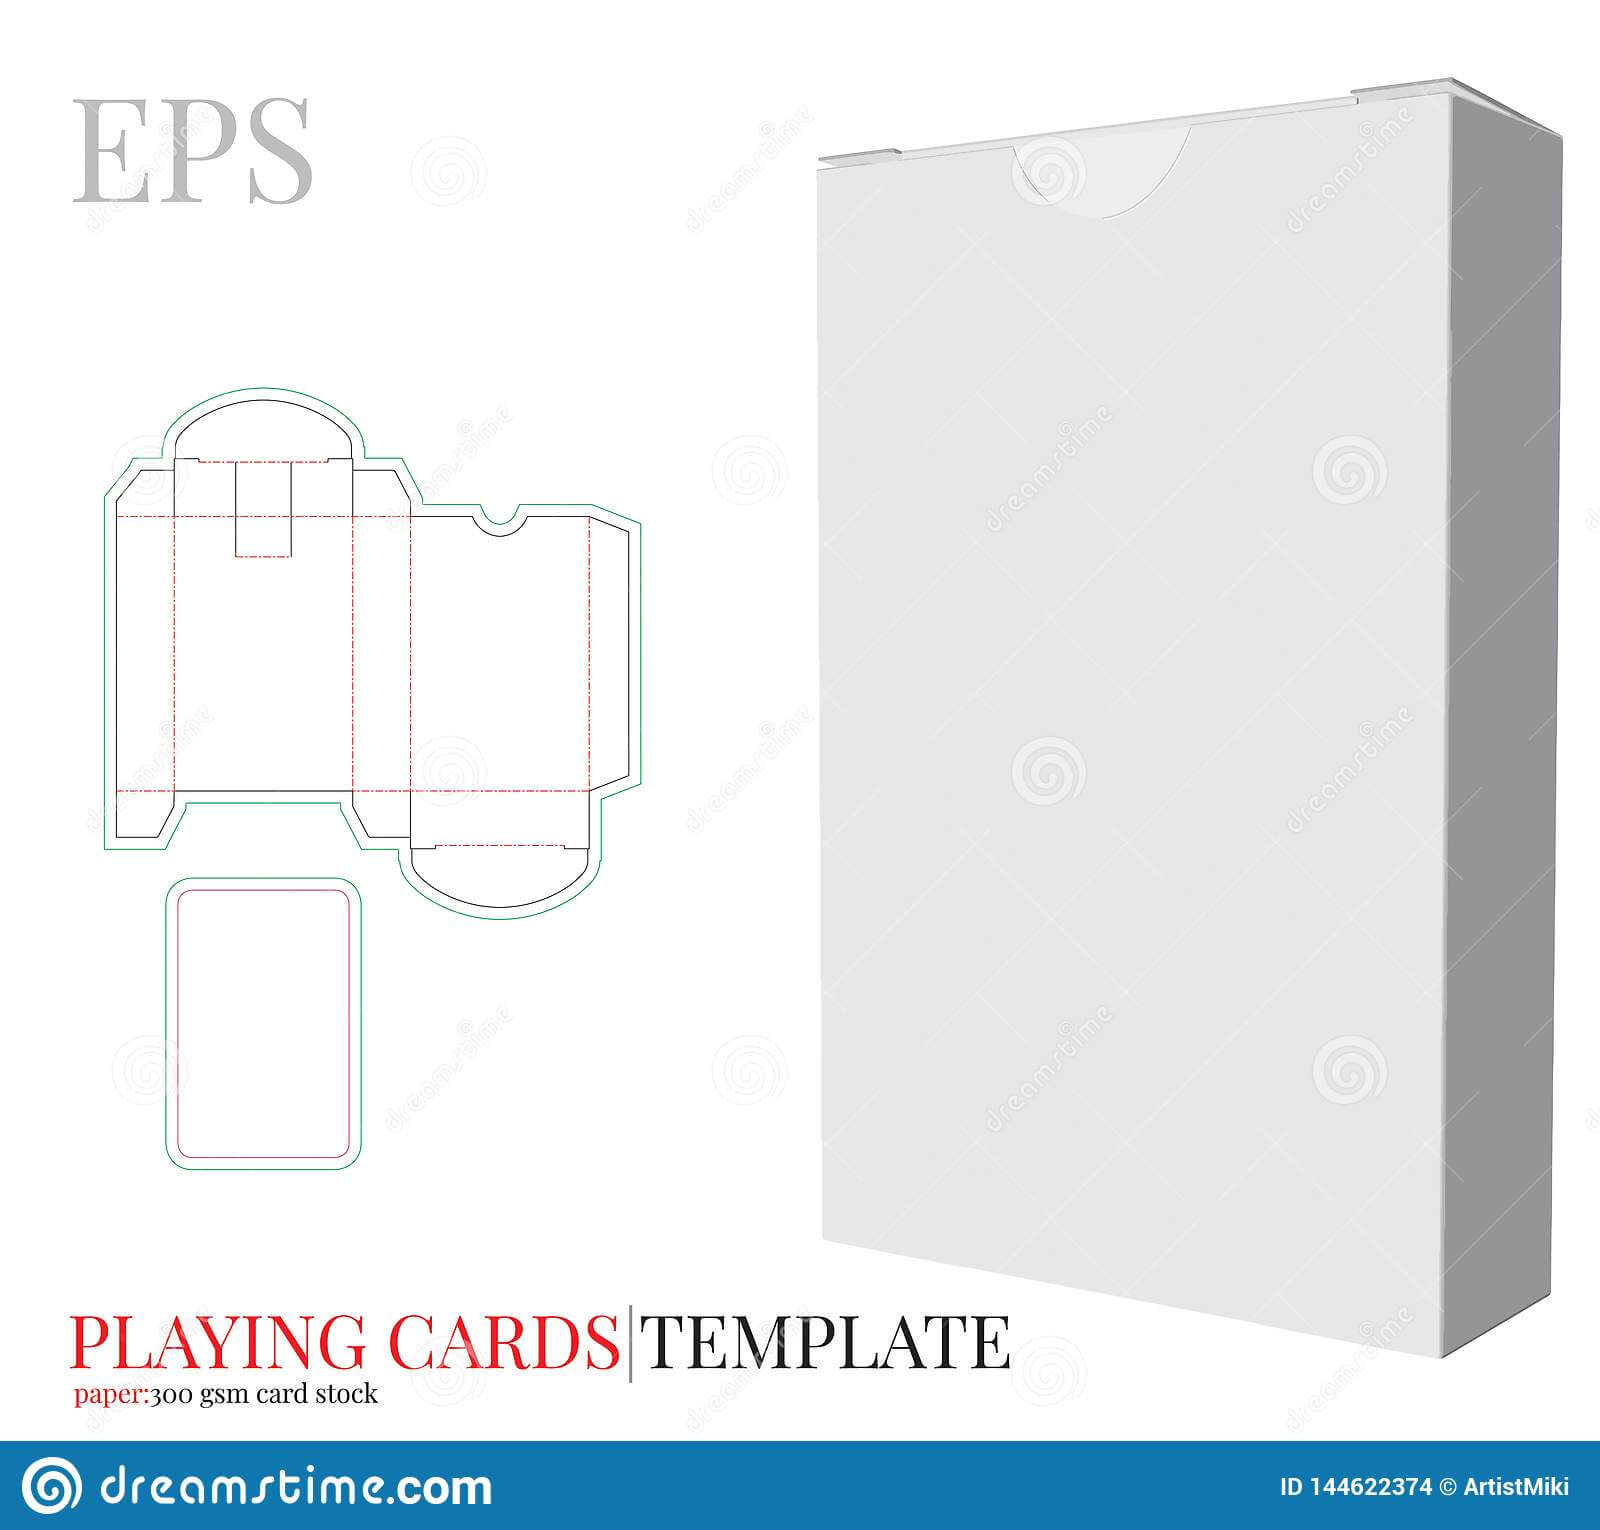 Playing Cards Template And Playing Cards Box Template Vector For Deck Of Cards Template